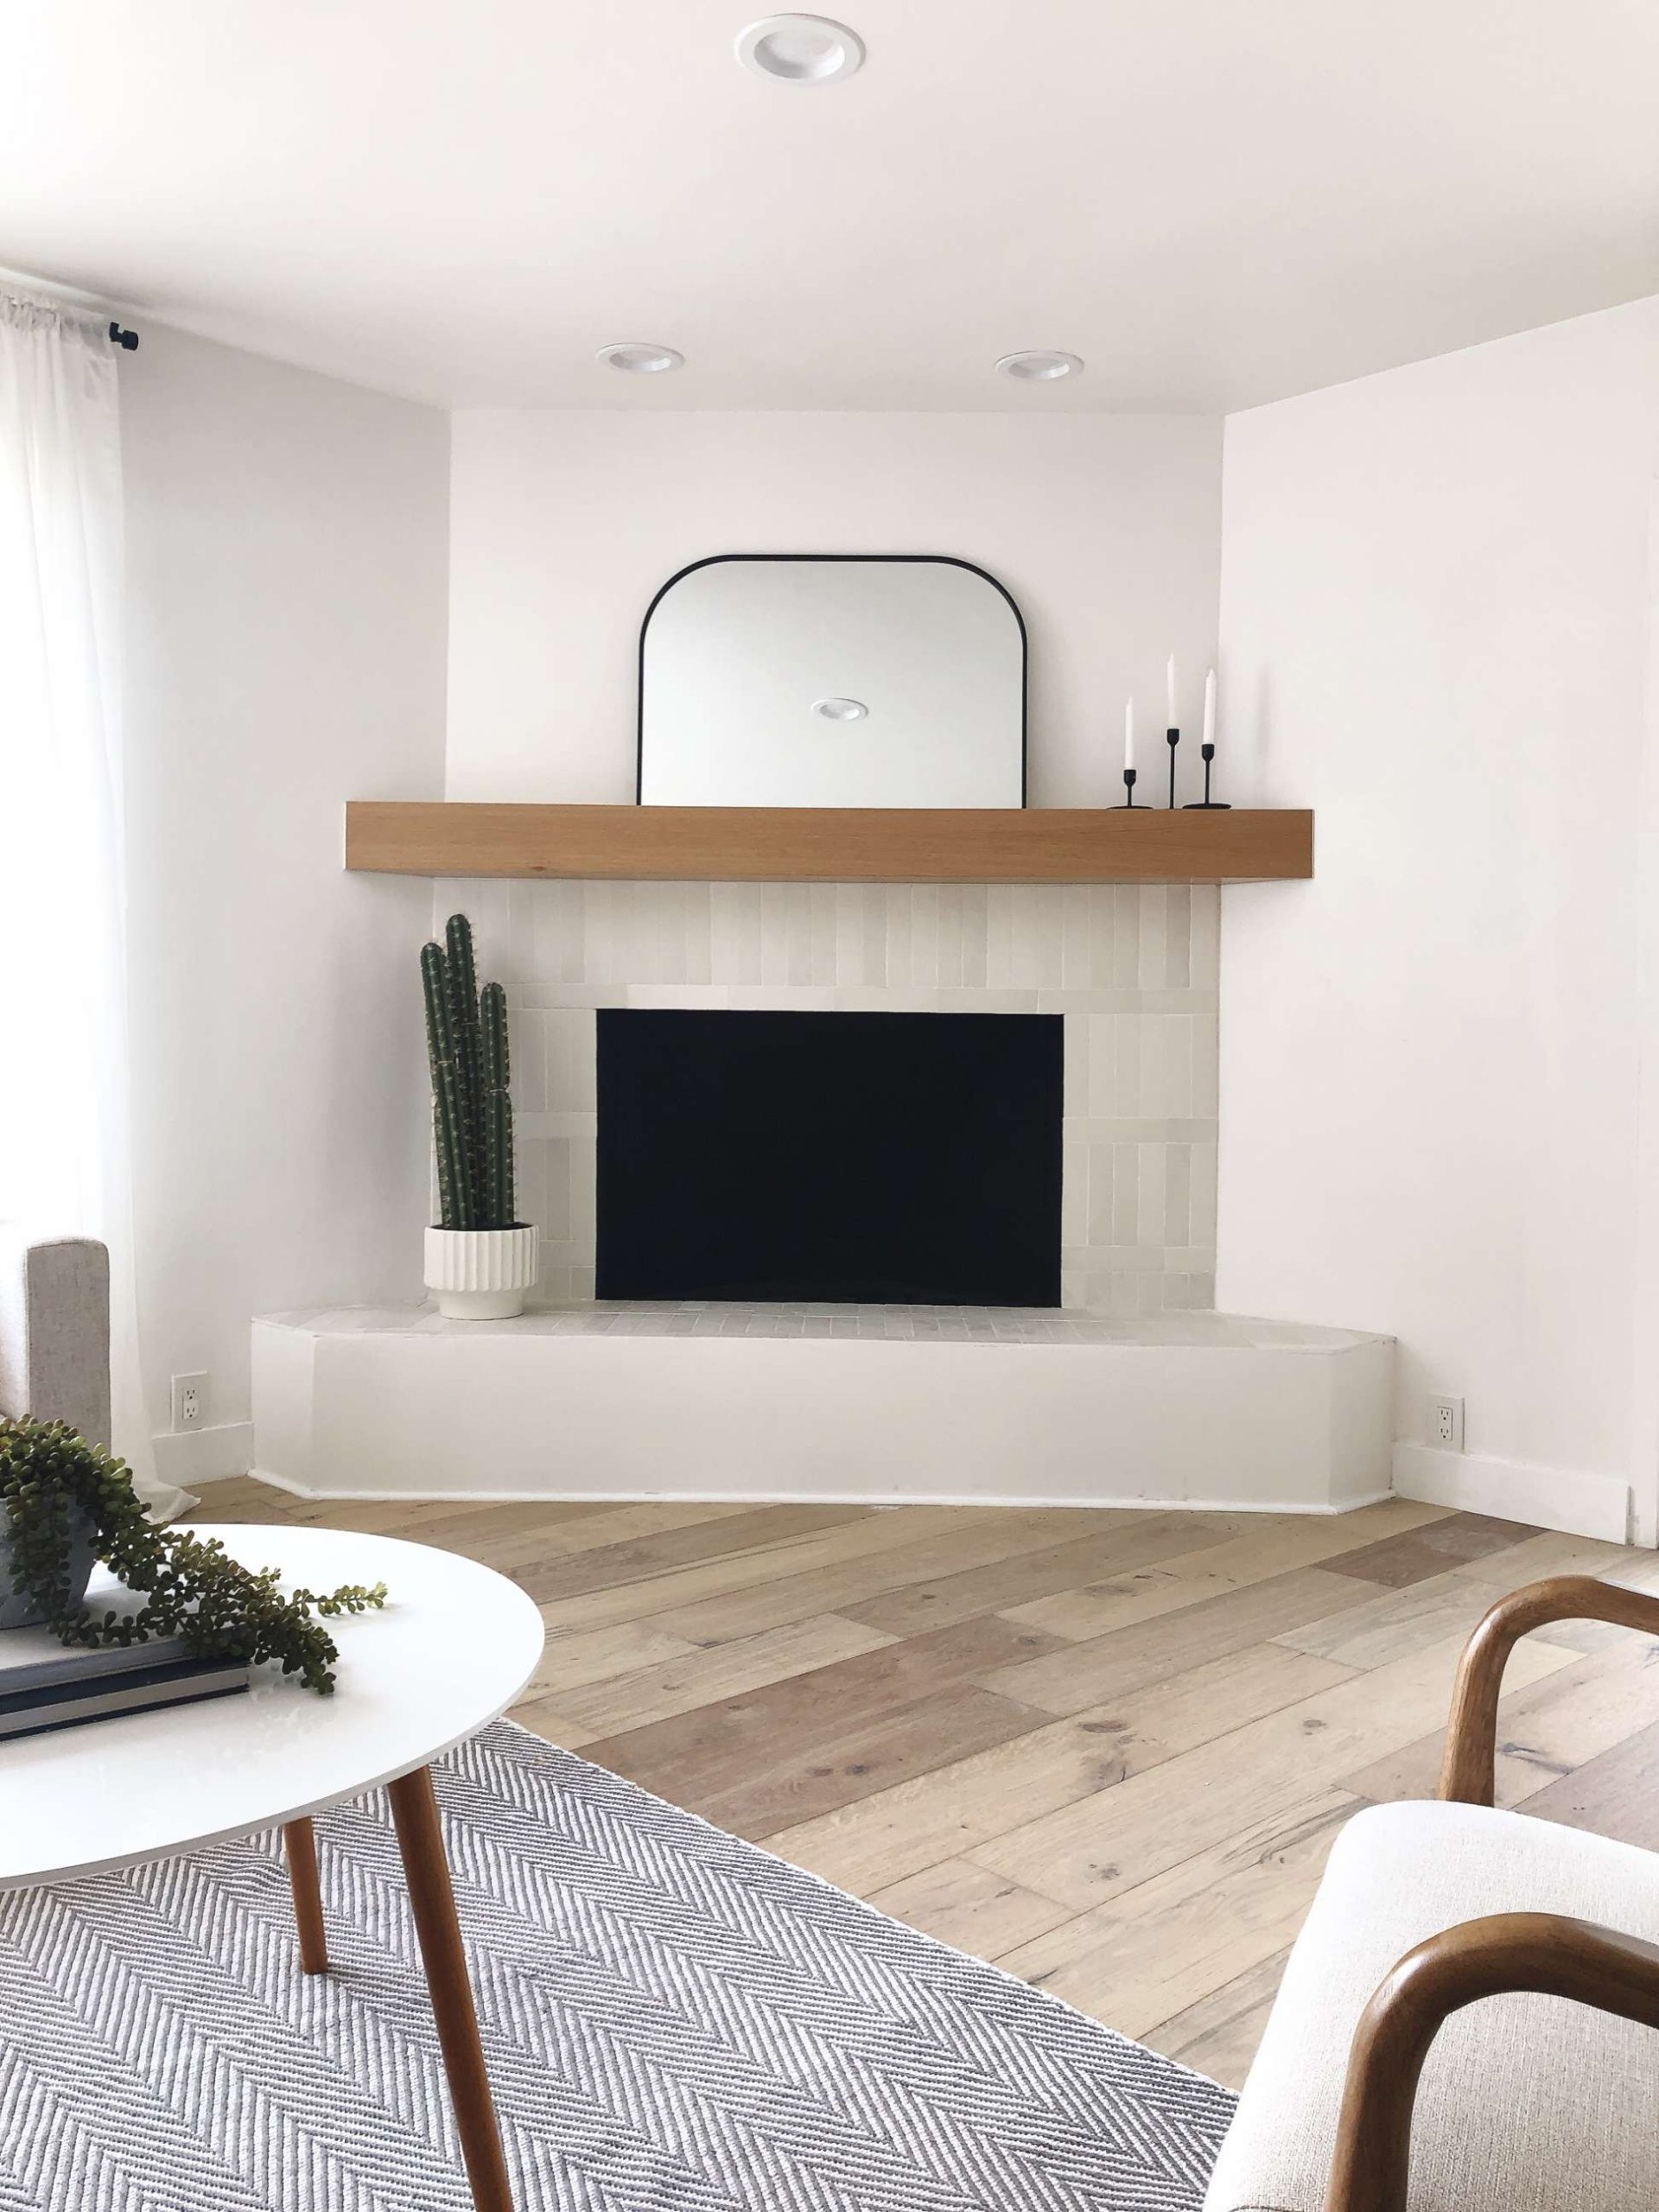 We Hearth Tile: Six Ideas for A Fireplace You